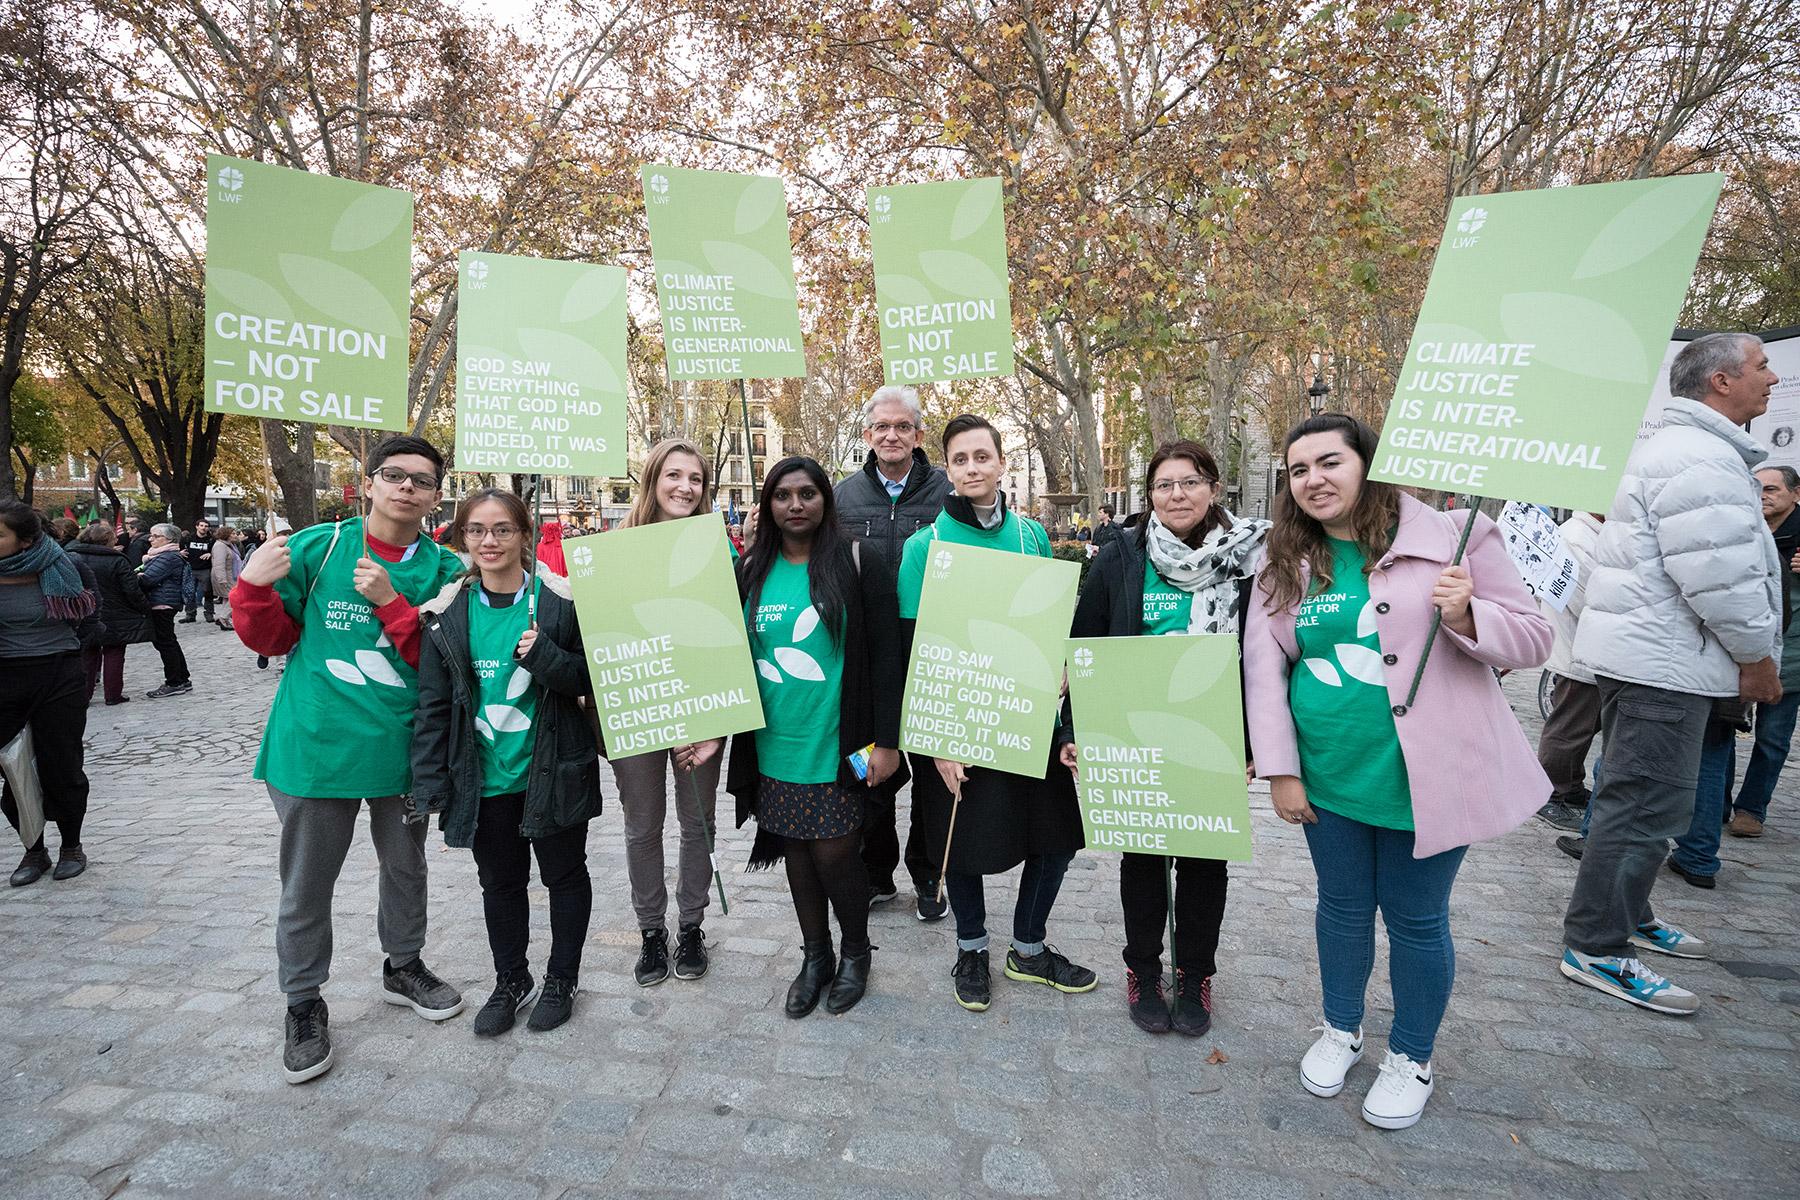 LWF delegates to COP25 taking place in Madrid, Spain, in 2019 preparing to join a march through the streets of central Madrid as part of a public contribution to the United Nations climate meeting, urging decision-makers to take action for climate justice. Photo: LWF/Albin Hillert